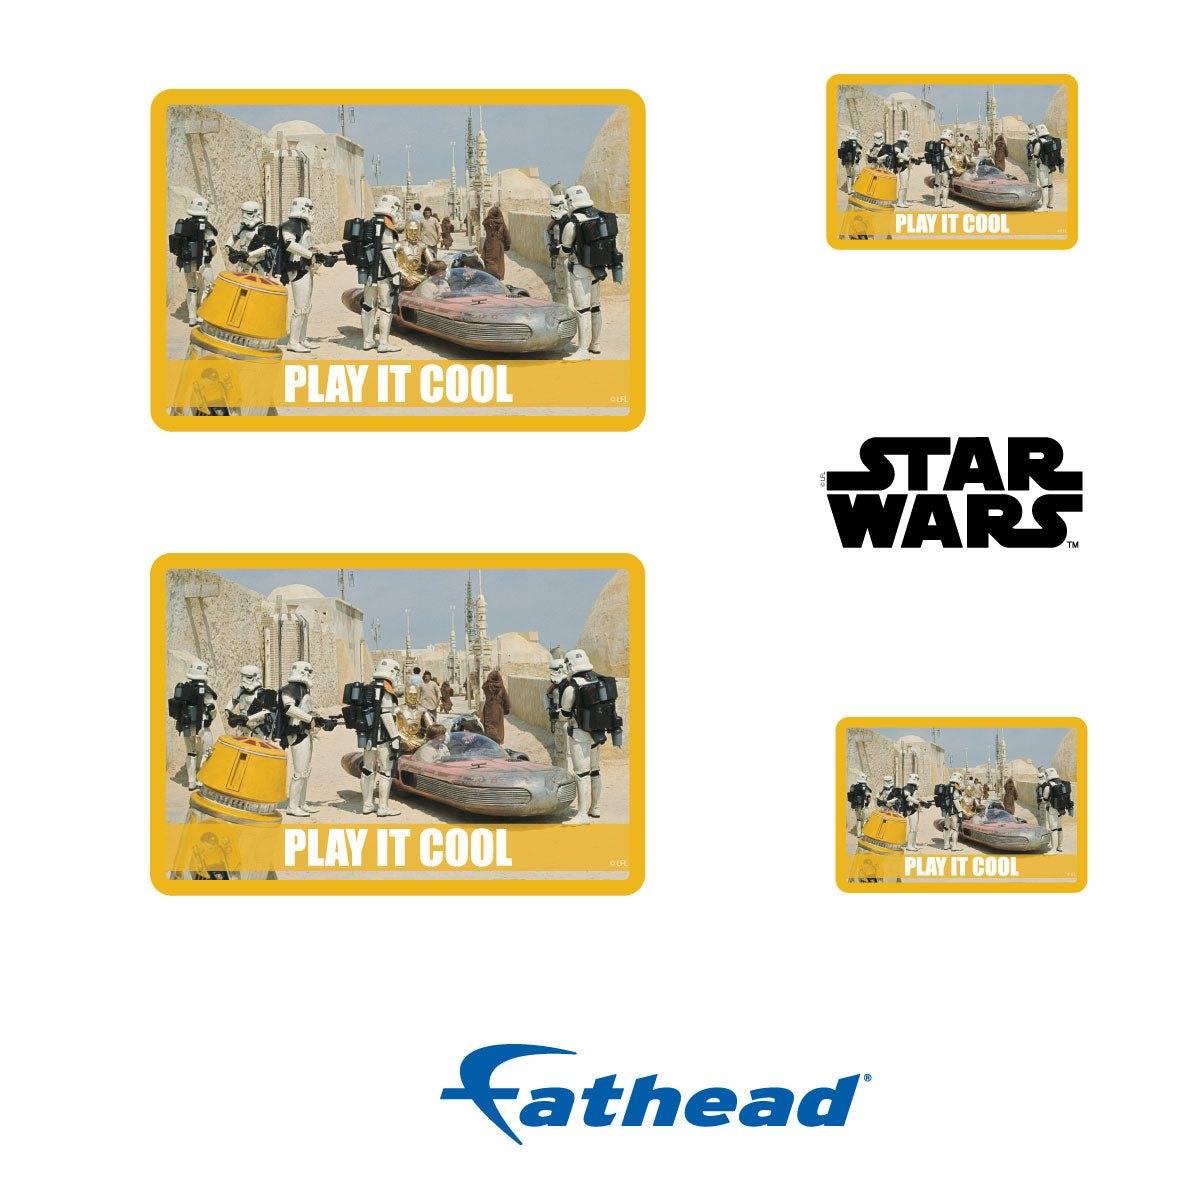 Play it Cool meme Minis        - Officially Licensed Star Wars Removable     Adhesive Decal